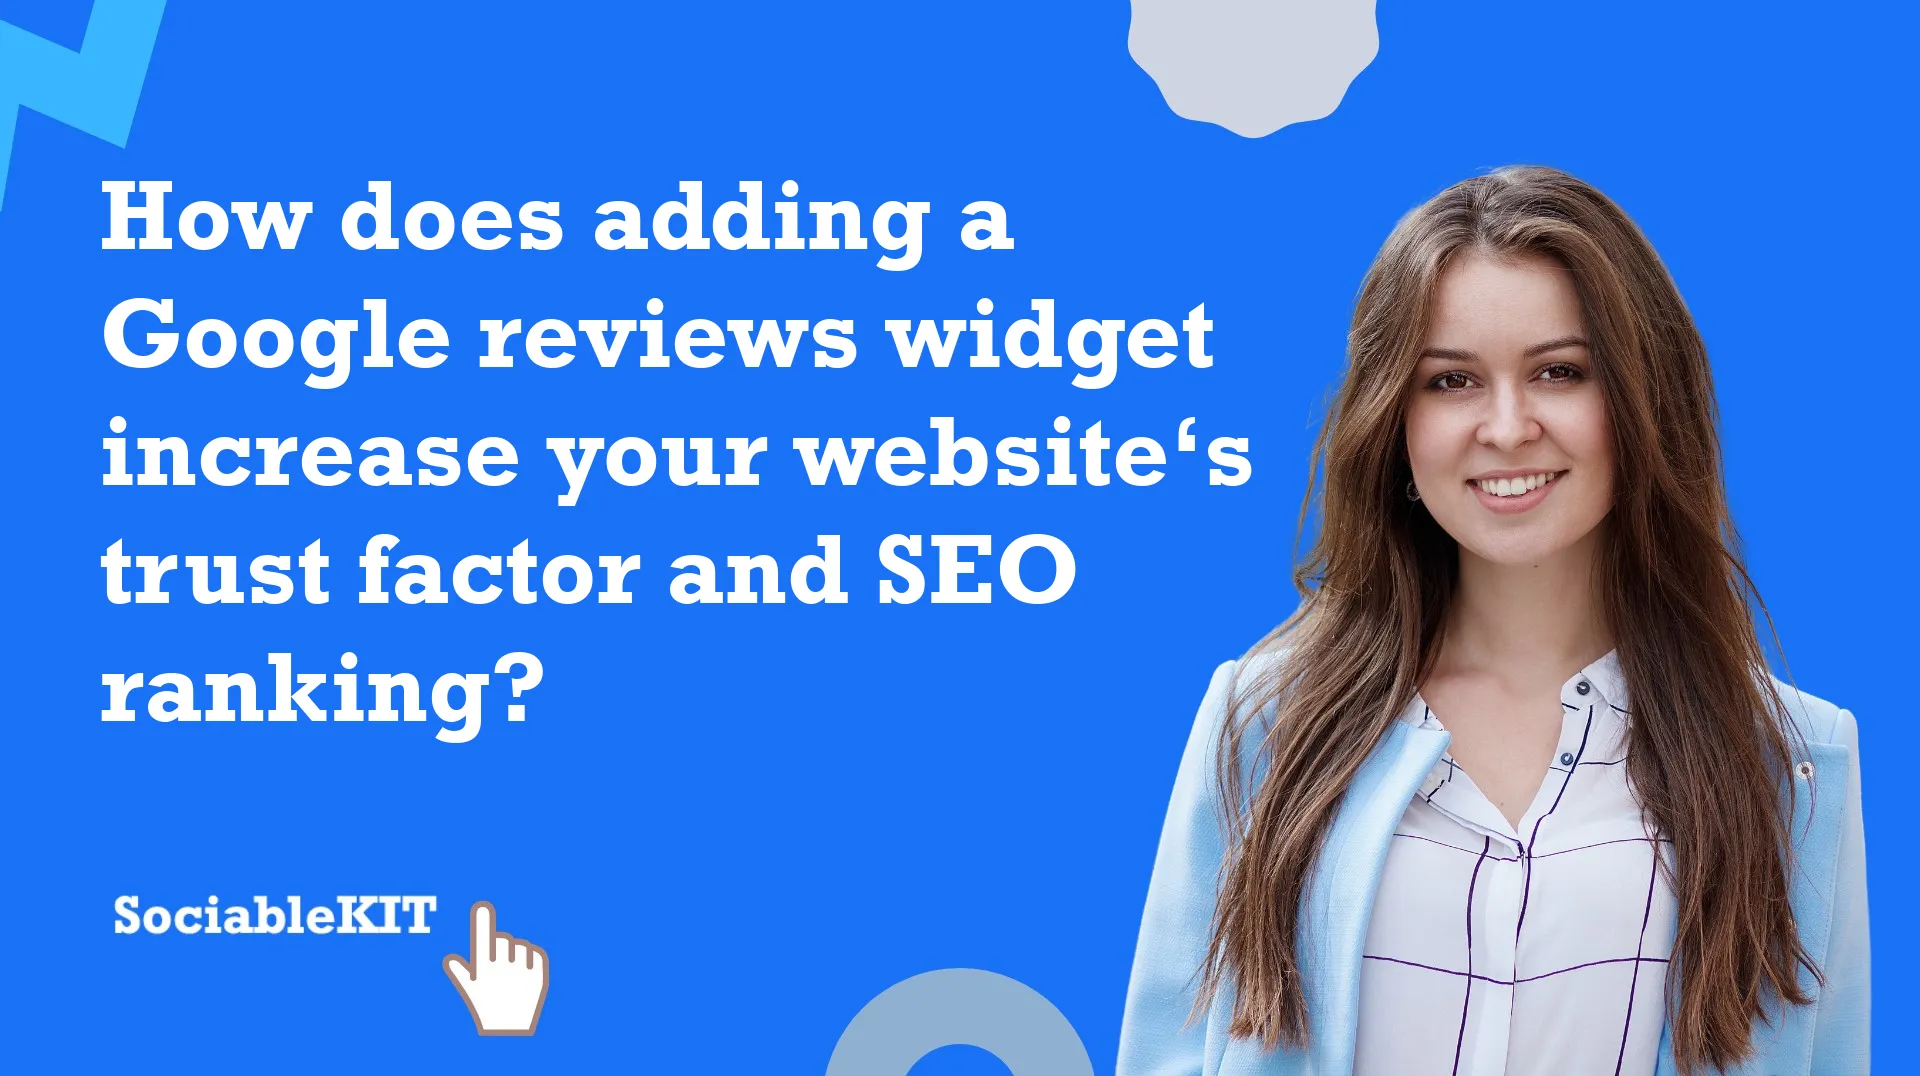 How does adding a Google reviews widget increase your website’s trust factor and SEO ranking?